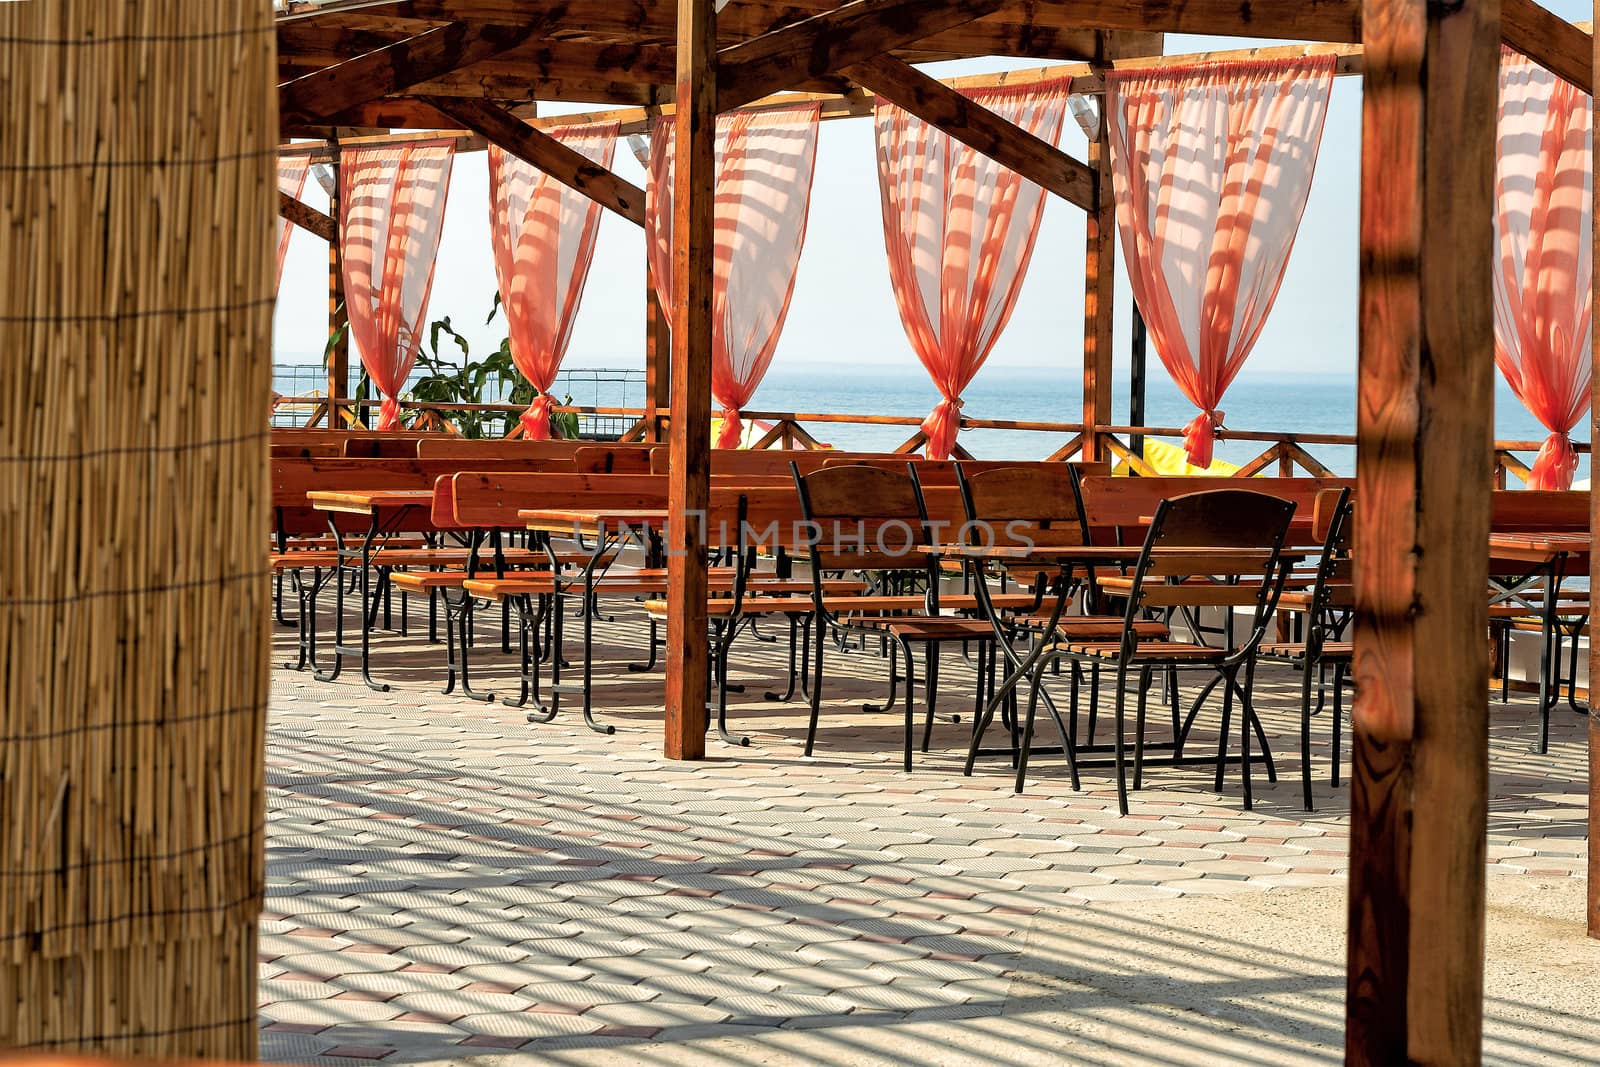 View out across a sunny open-air wooden deck with restaurant tables and chairs to the ocean beyond